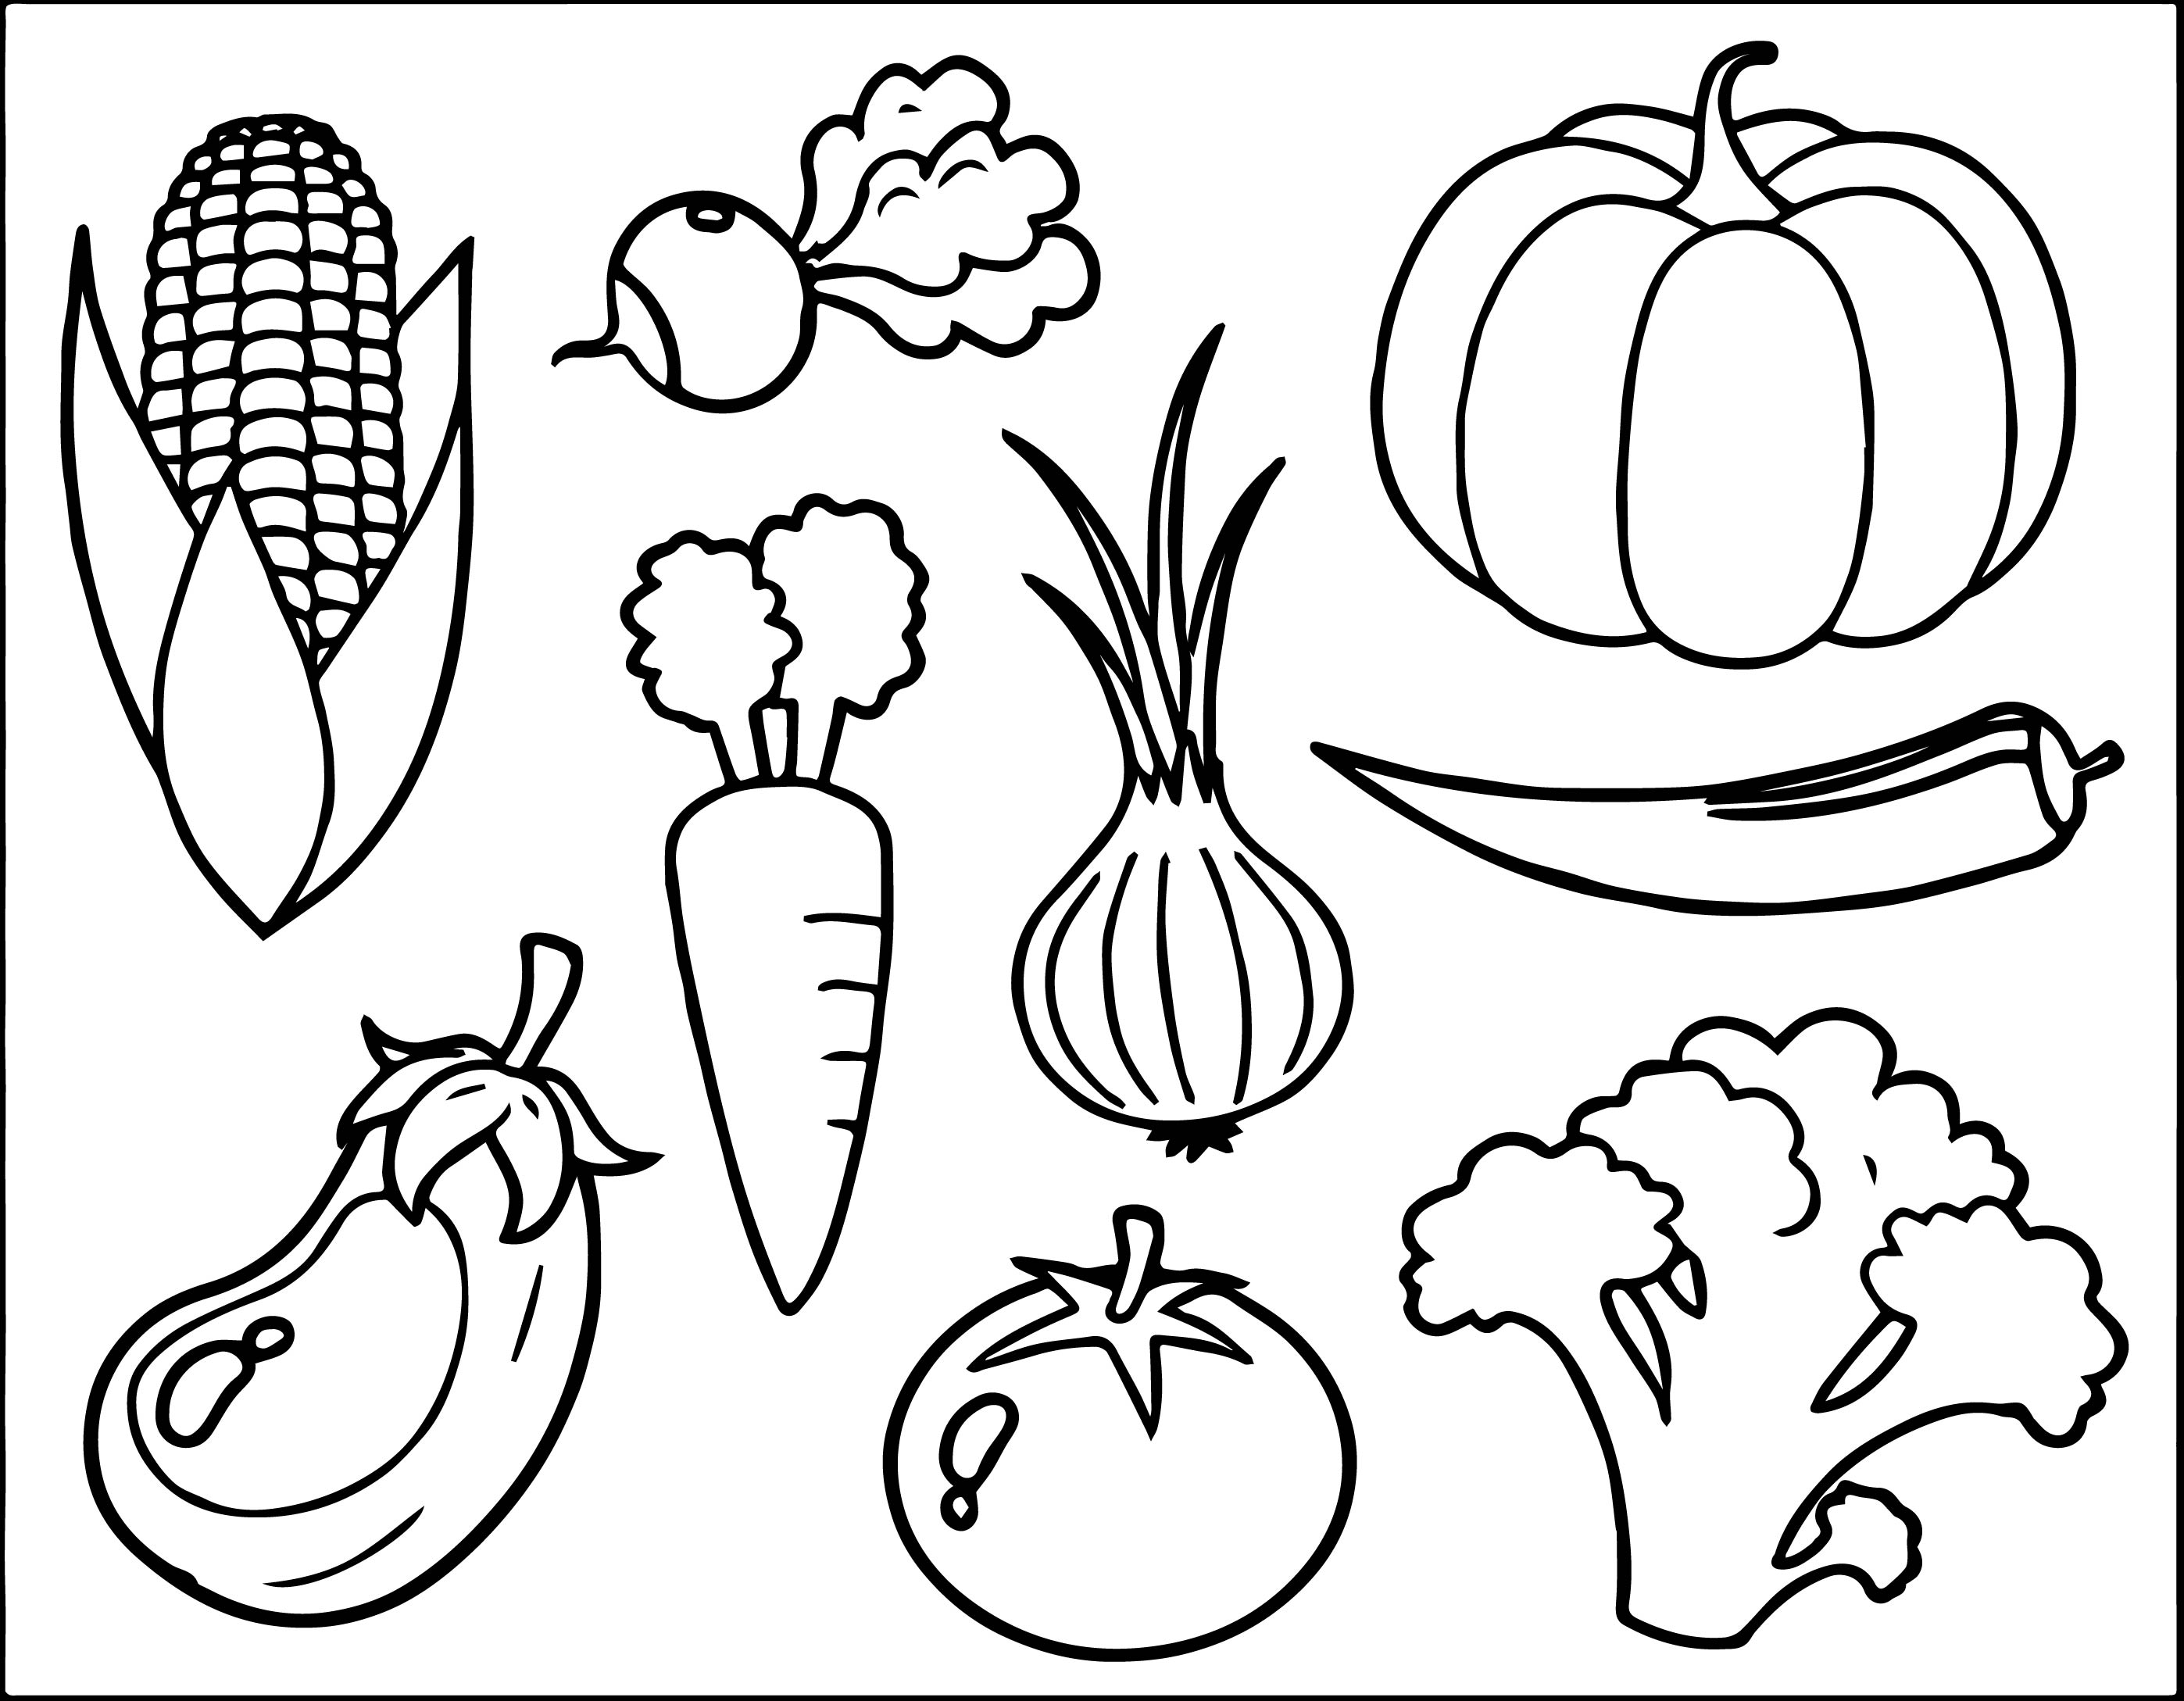 Free Printable Vegetable Pictures